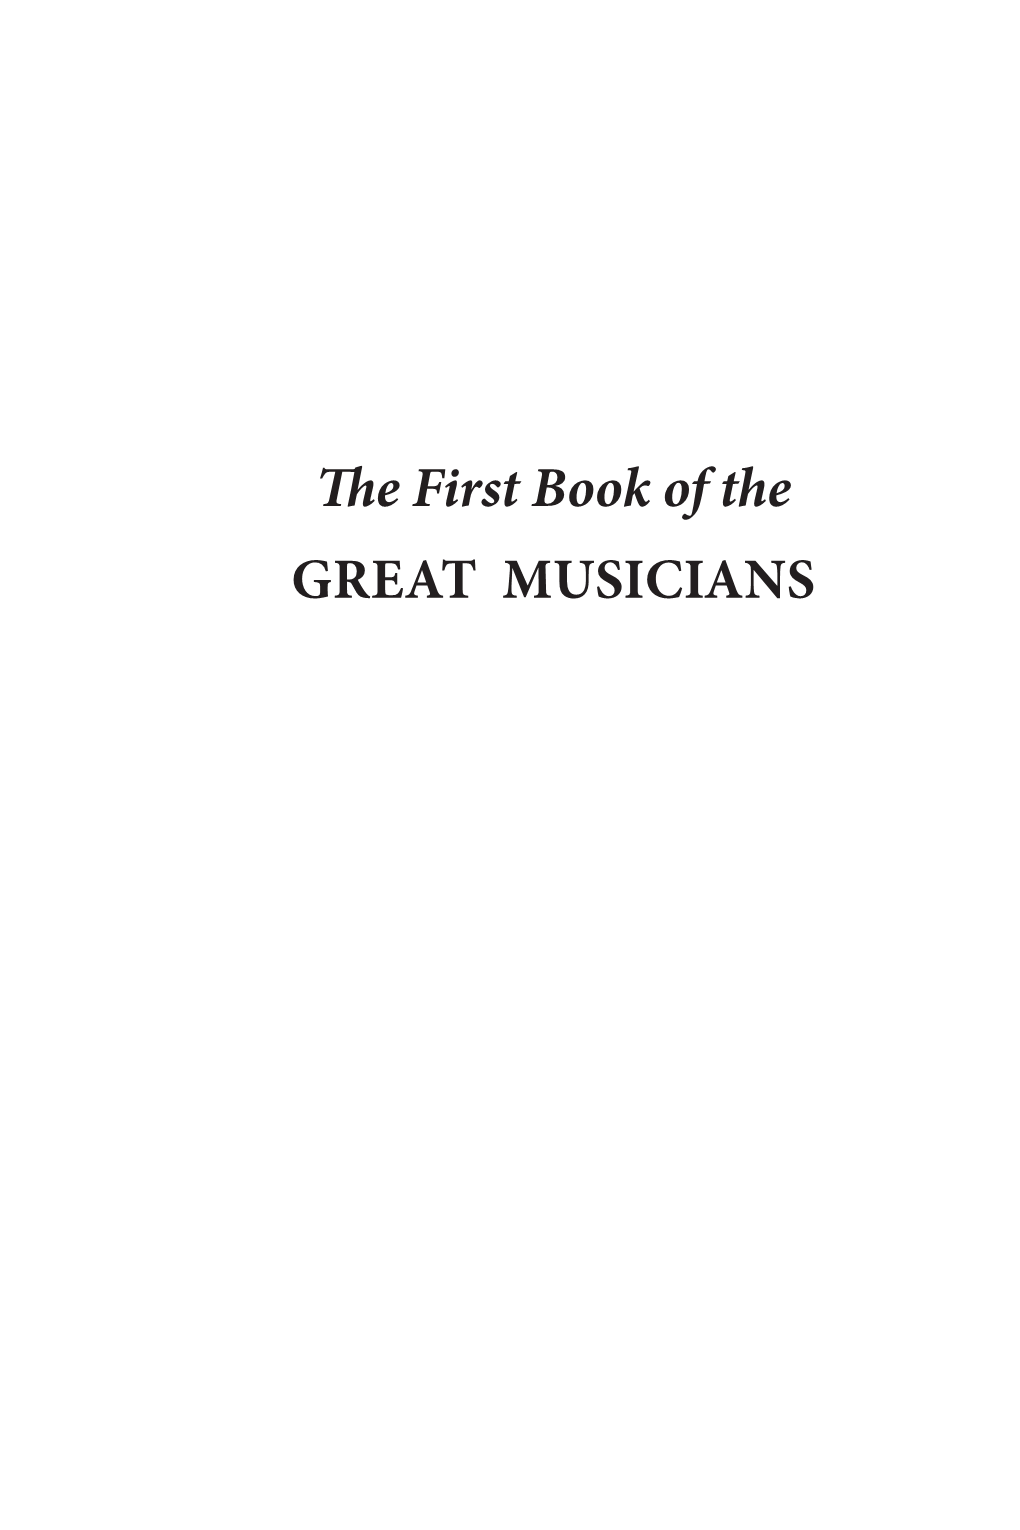 The First Book of the Great Musicians